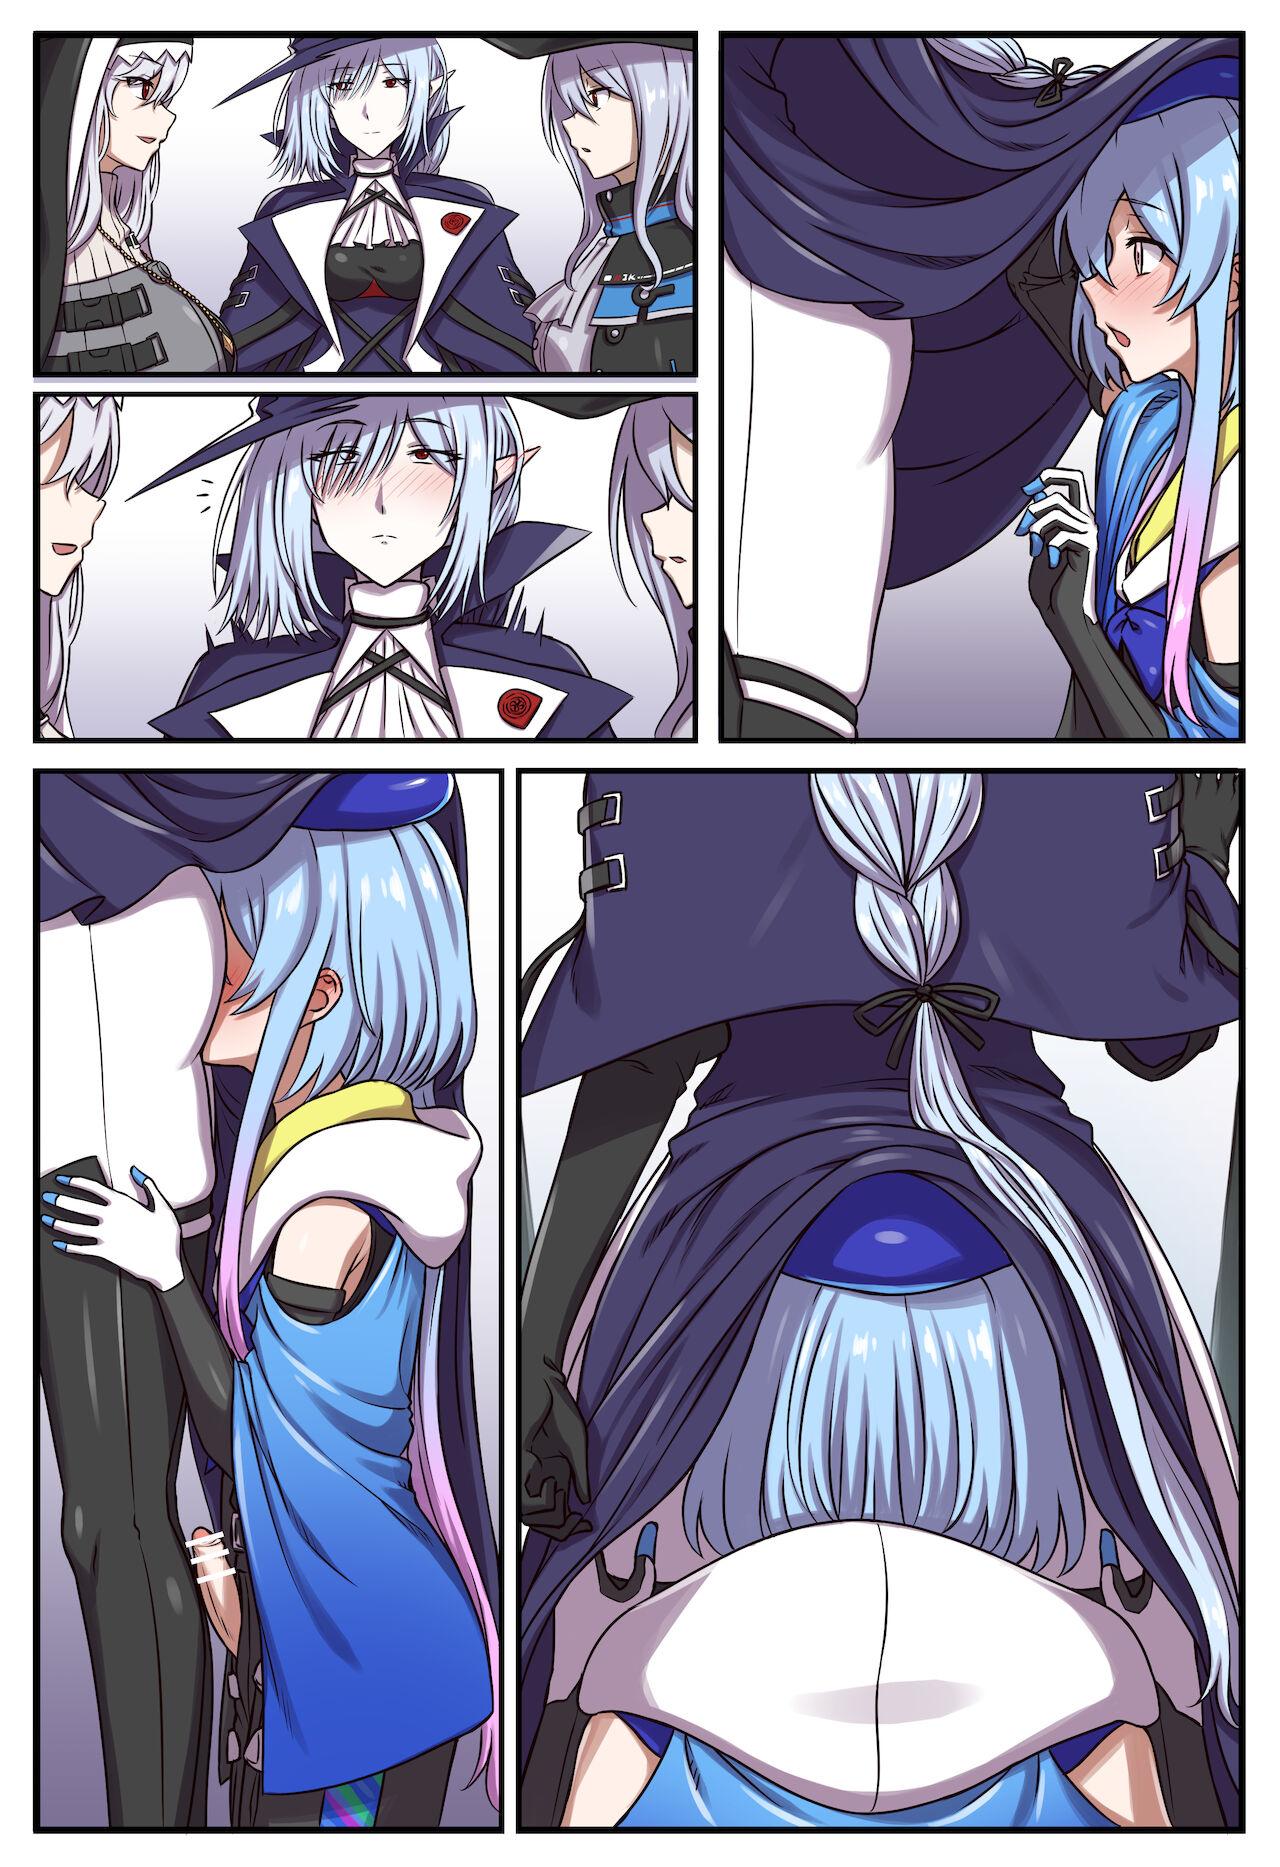 Pussylicking 剑鱼捕食水母珍贵影像 2 - Arknights Small Tits - Page 7